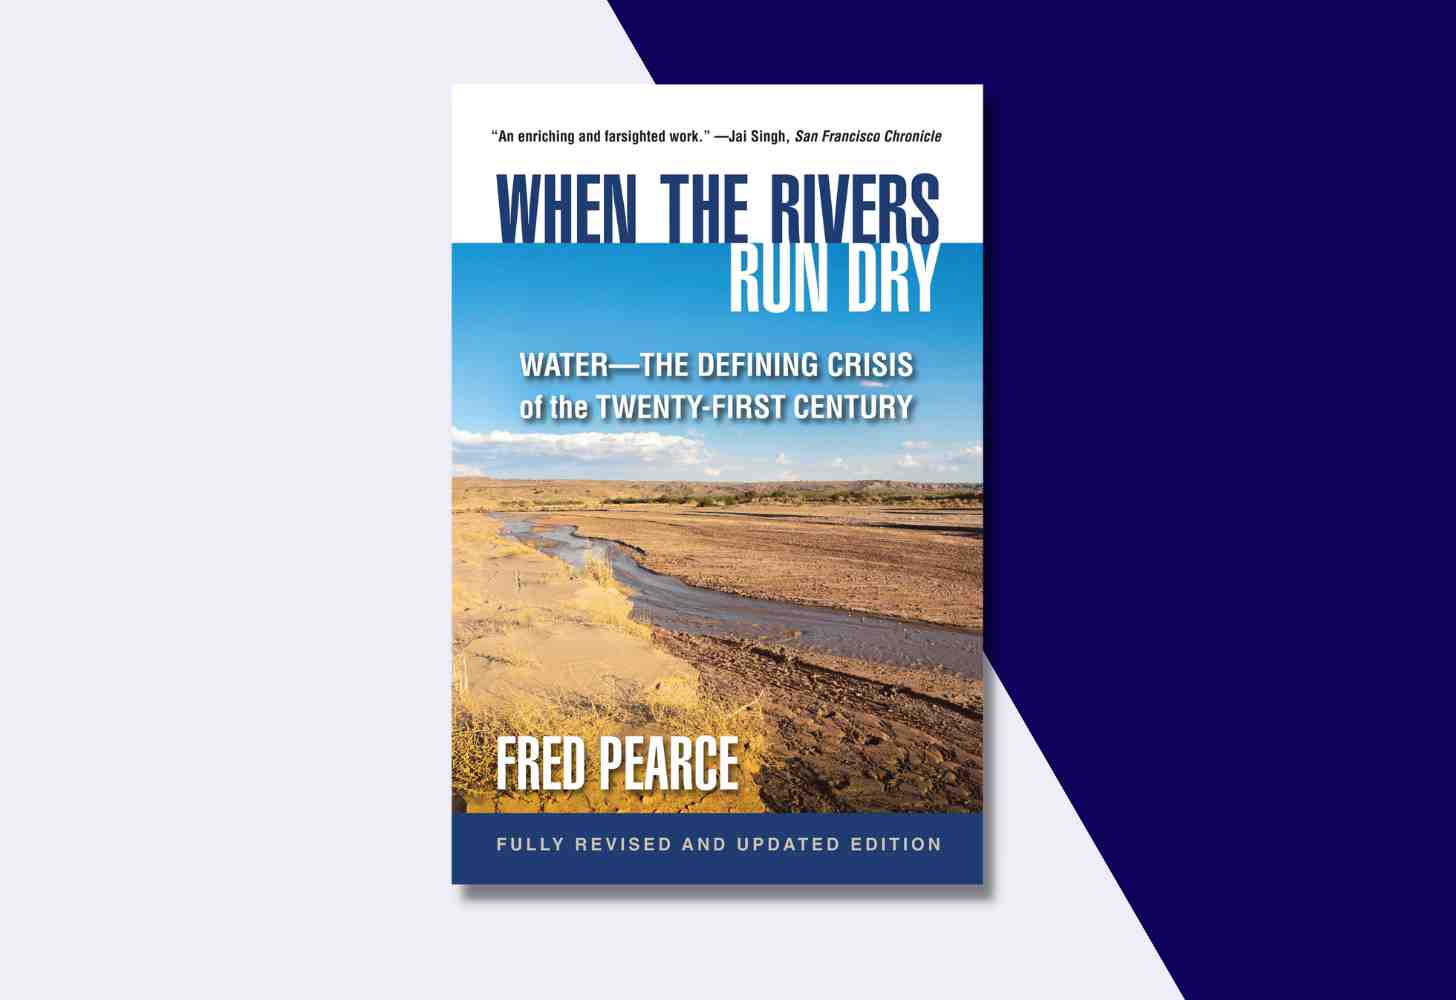 The Cover Of: “When The Rivers Run Dry: Water — The Defining Crisis of the Twenty-first Century” by Fred Pearce